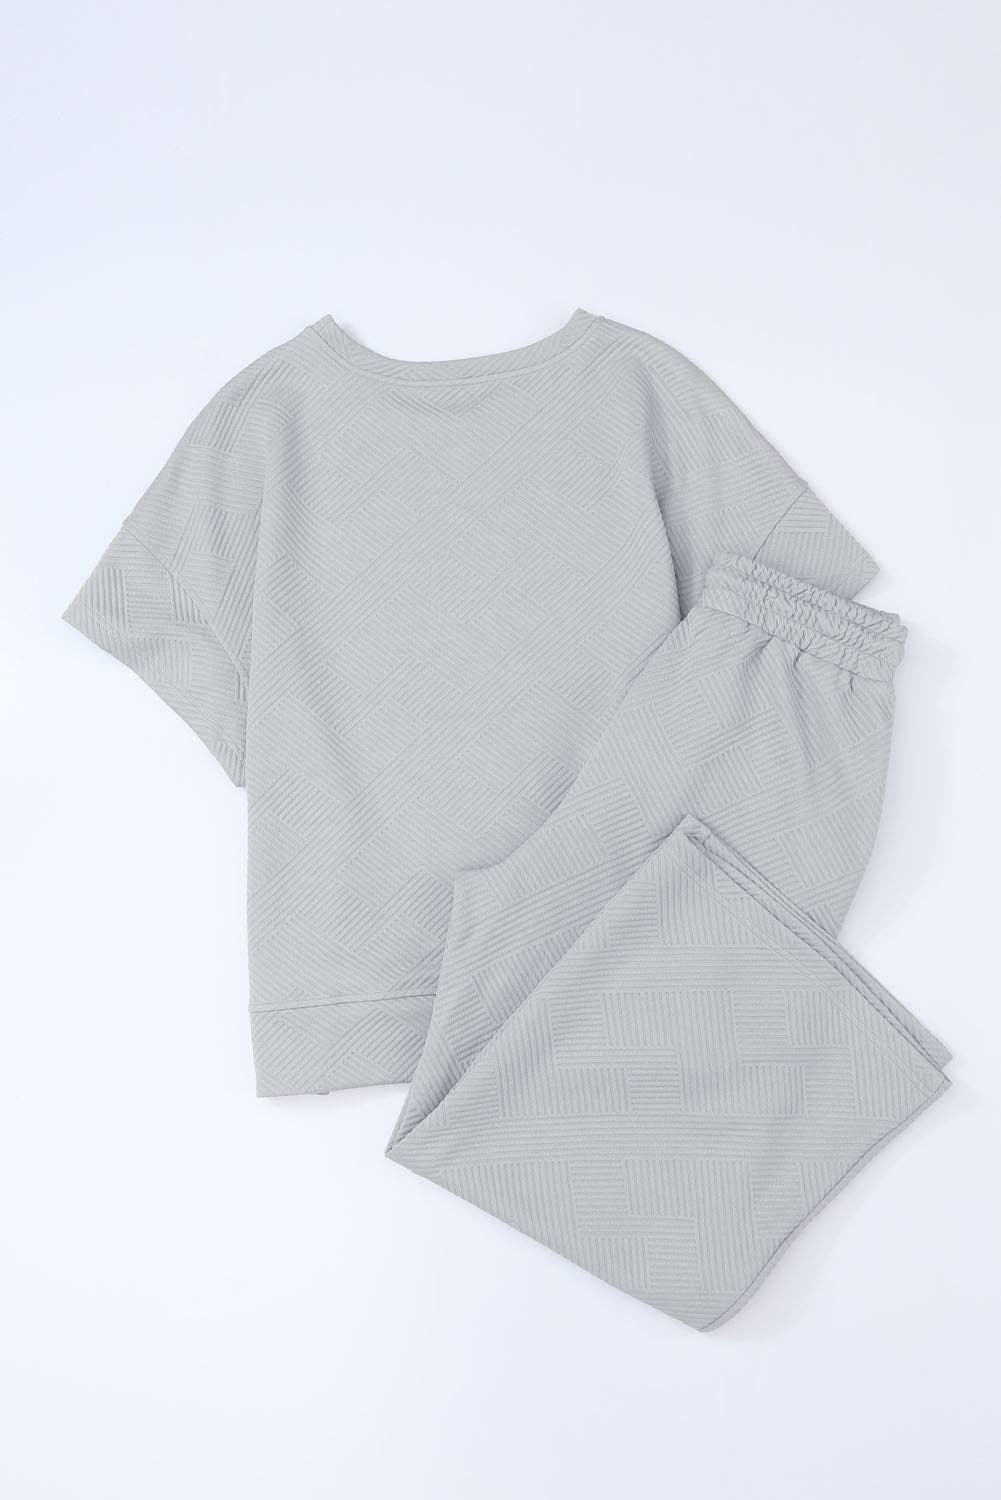 LAST ONE Gray Textured Loose Fit T Shirt and Drawstring Pants Set: Gray / 2XL / 95%Polyester+5%Elastane